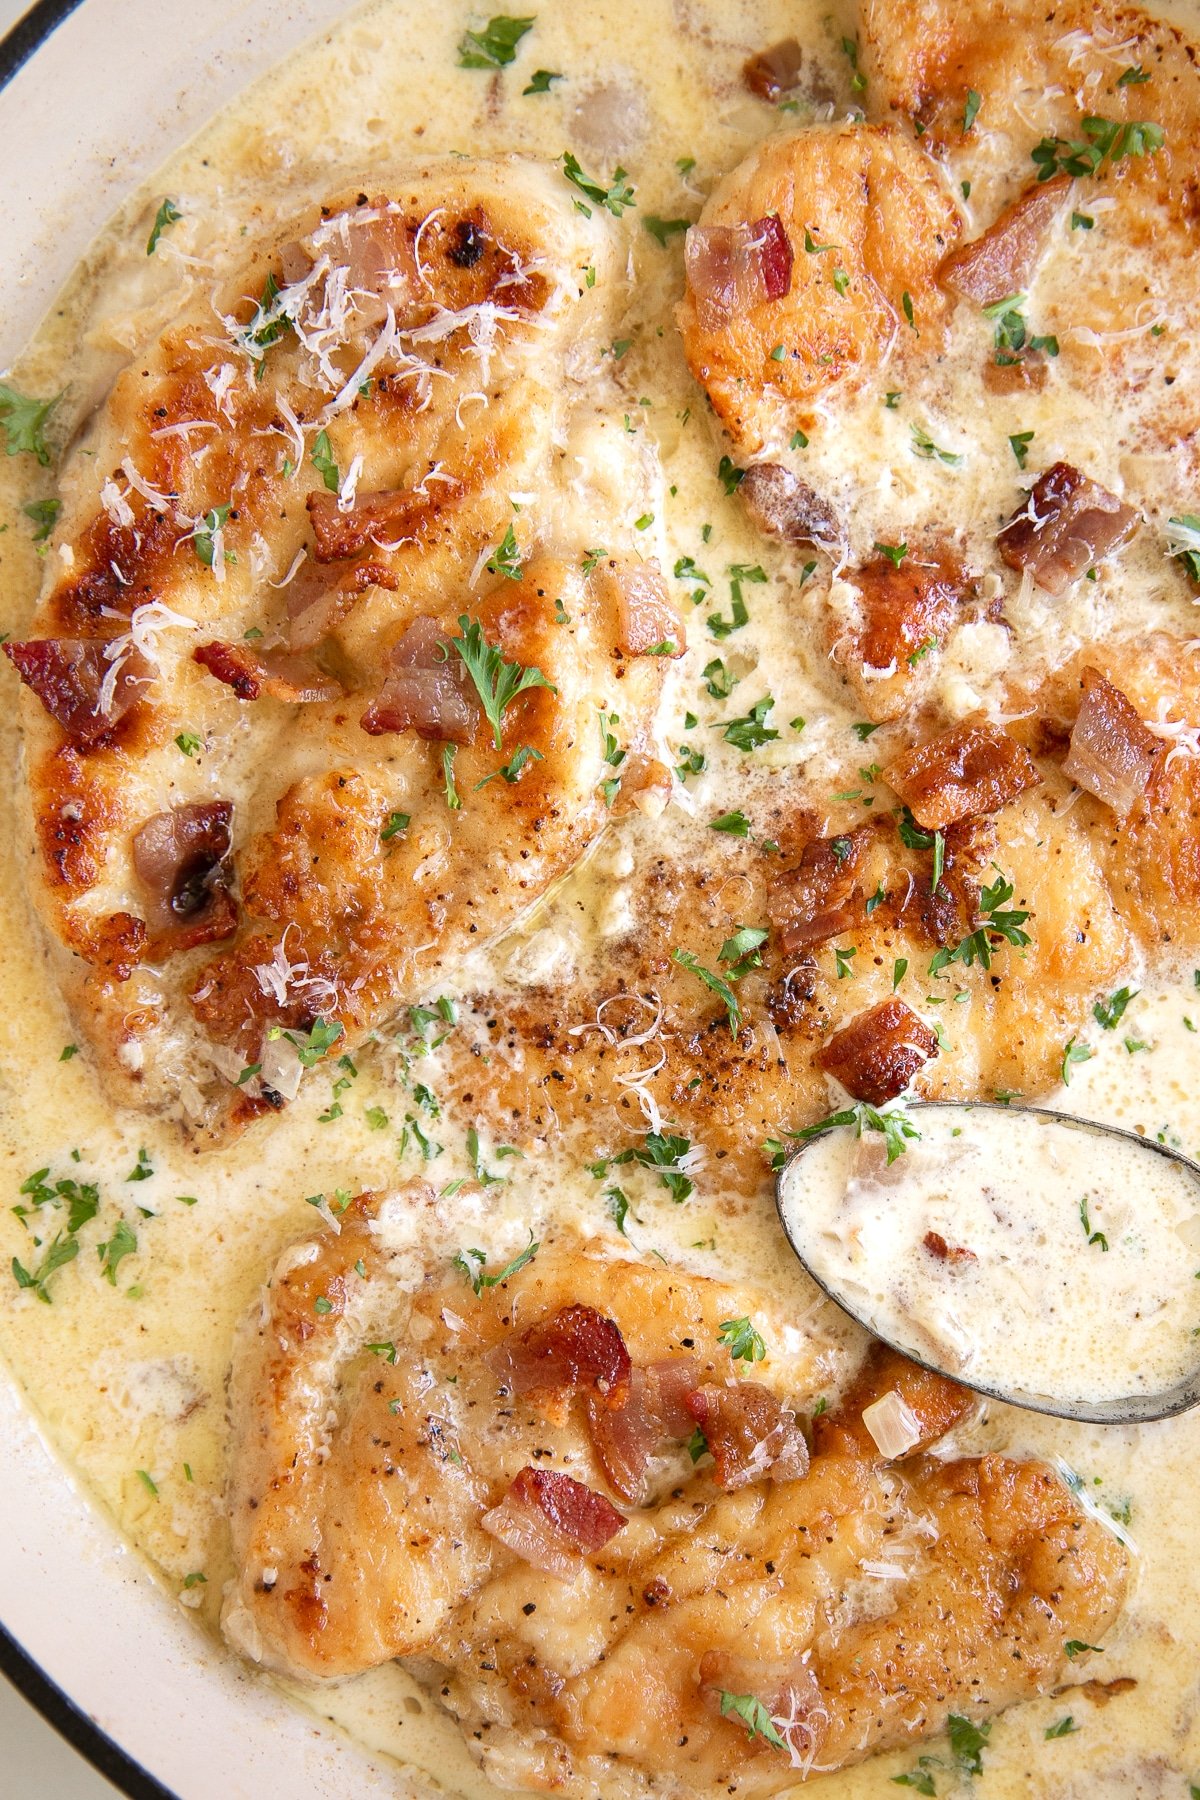 Overhead image of a large skillet filled with seared chicken breast cutlets simmering in a homemade cream sauce with bacon and garnished with parsley.